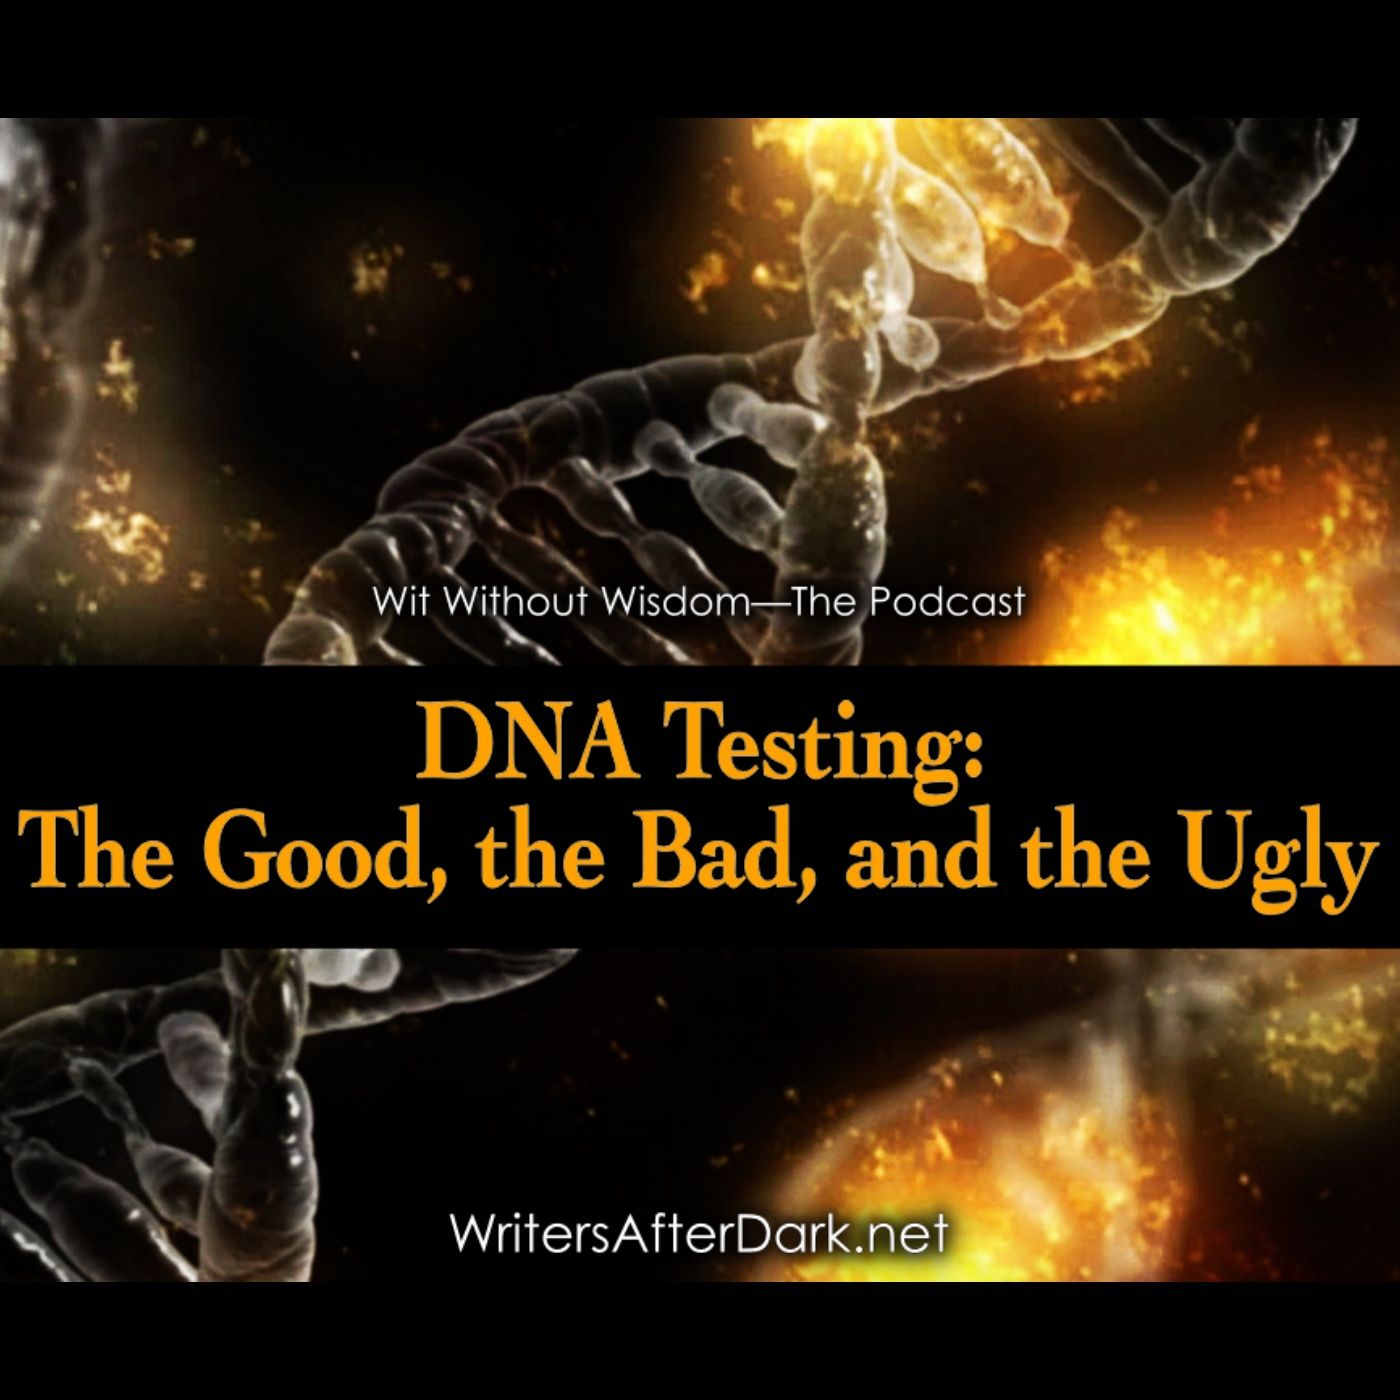 DNA Testing: The Good, the Bad, and the Ugly